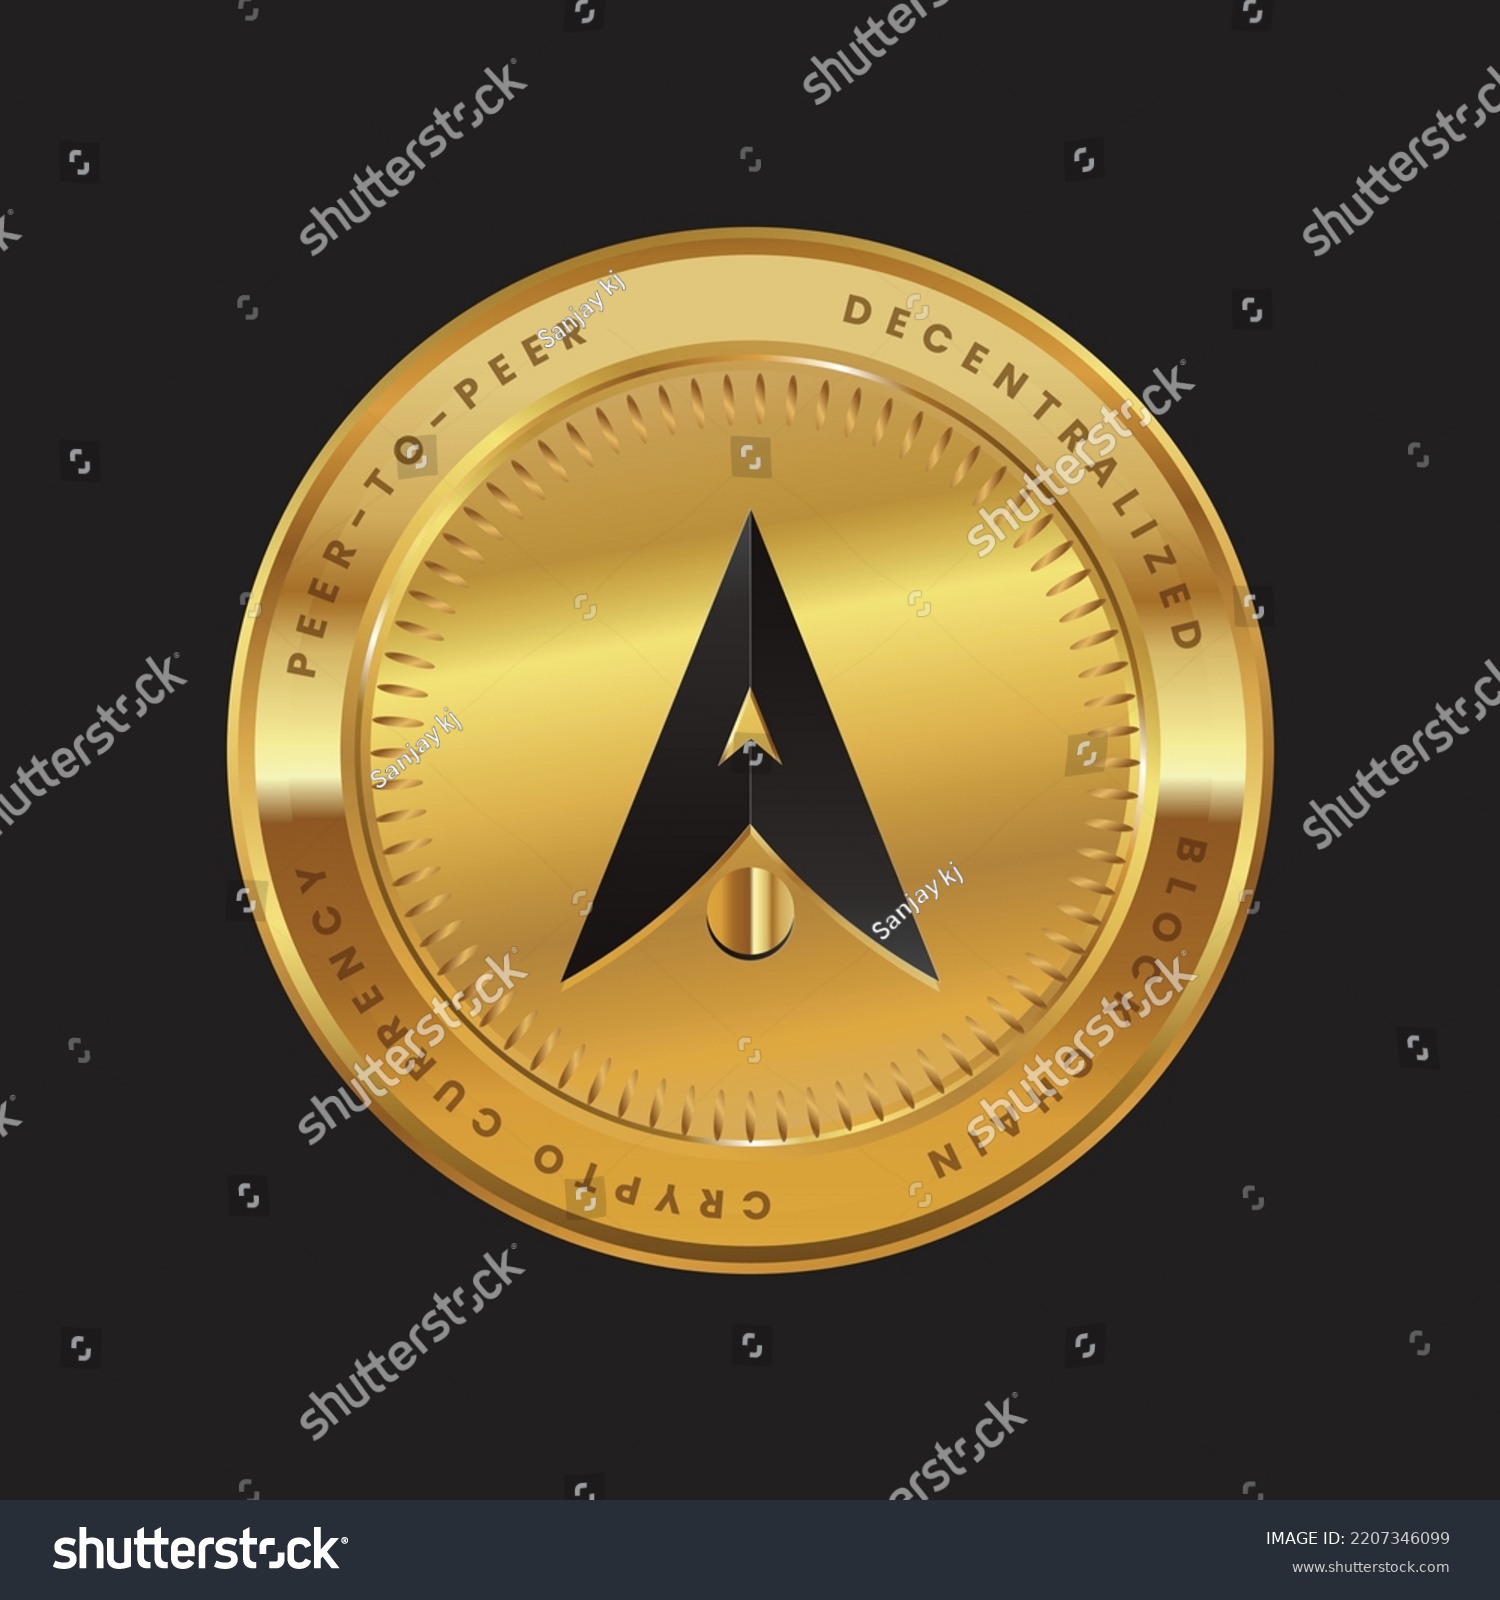 SVG of Alpha Venture DAO Cryptocurrency logo in black color concept on gold coin. ALPHA Token Block chain technology symbol. Vector illustration. svg